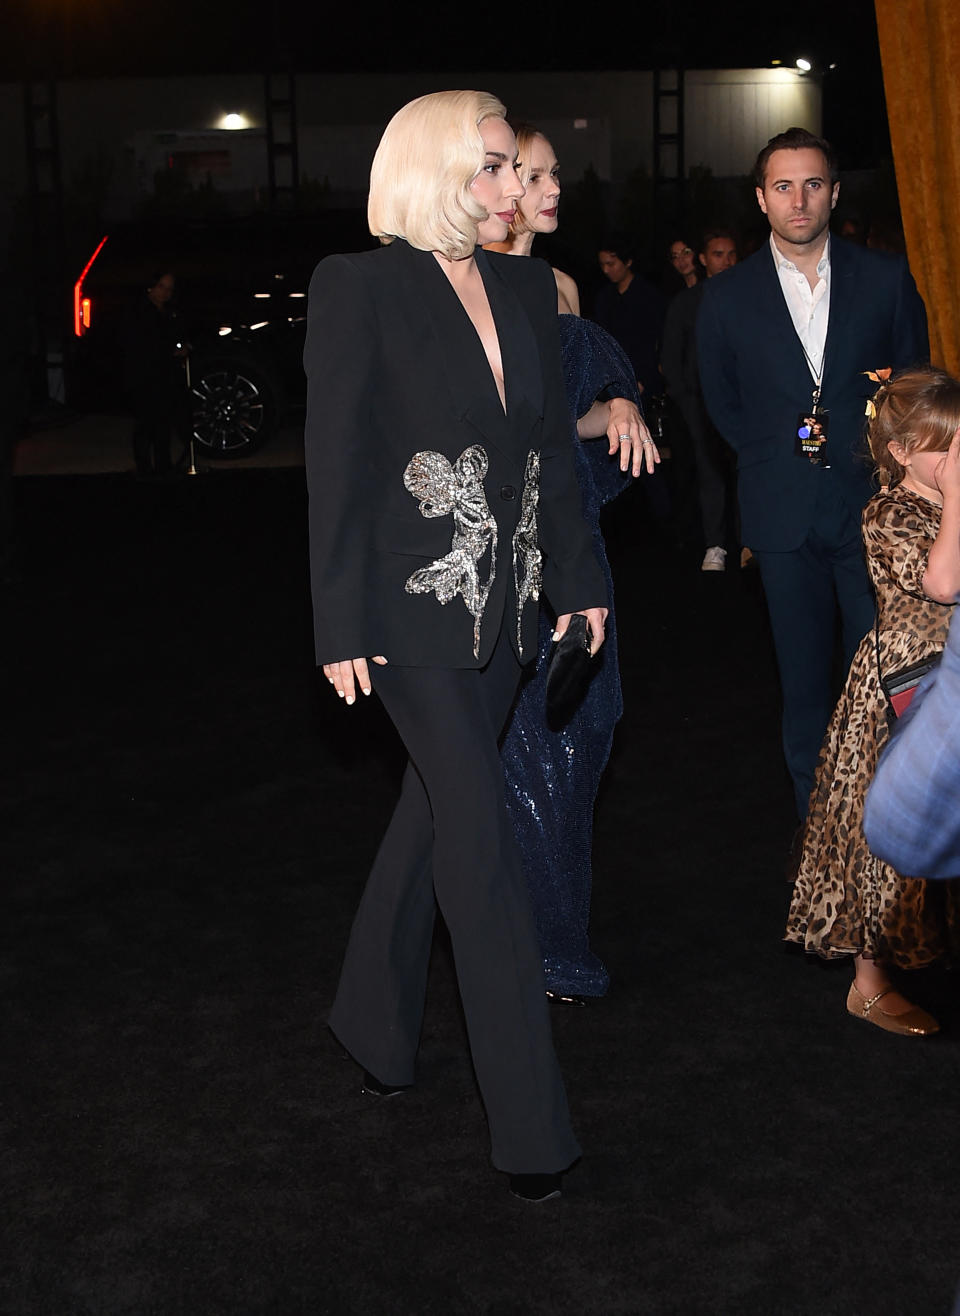 Carey Mulligan, Bradley Cooper and Lady Gaga arriving to the Los Angeles special screening of ?Maestro? at the Academy Museum of Motion Pictures on December 12, 2023 in Beverly Hills, Ca. © Lisa OConnor/AFF-USA.com. 12 Dec 2023 Pictured: Lady Gaga. Photo credit: Lisa OConnor/AFF-USA.com / MEGA TheMegaAgency.com +1 888 505 6342 (Mega Agency TagID: MEGA1071260_003.jpg) [Photo via Mega Agency]